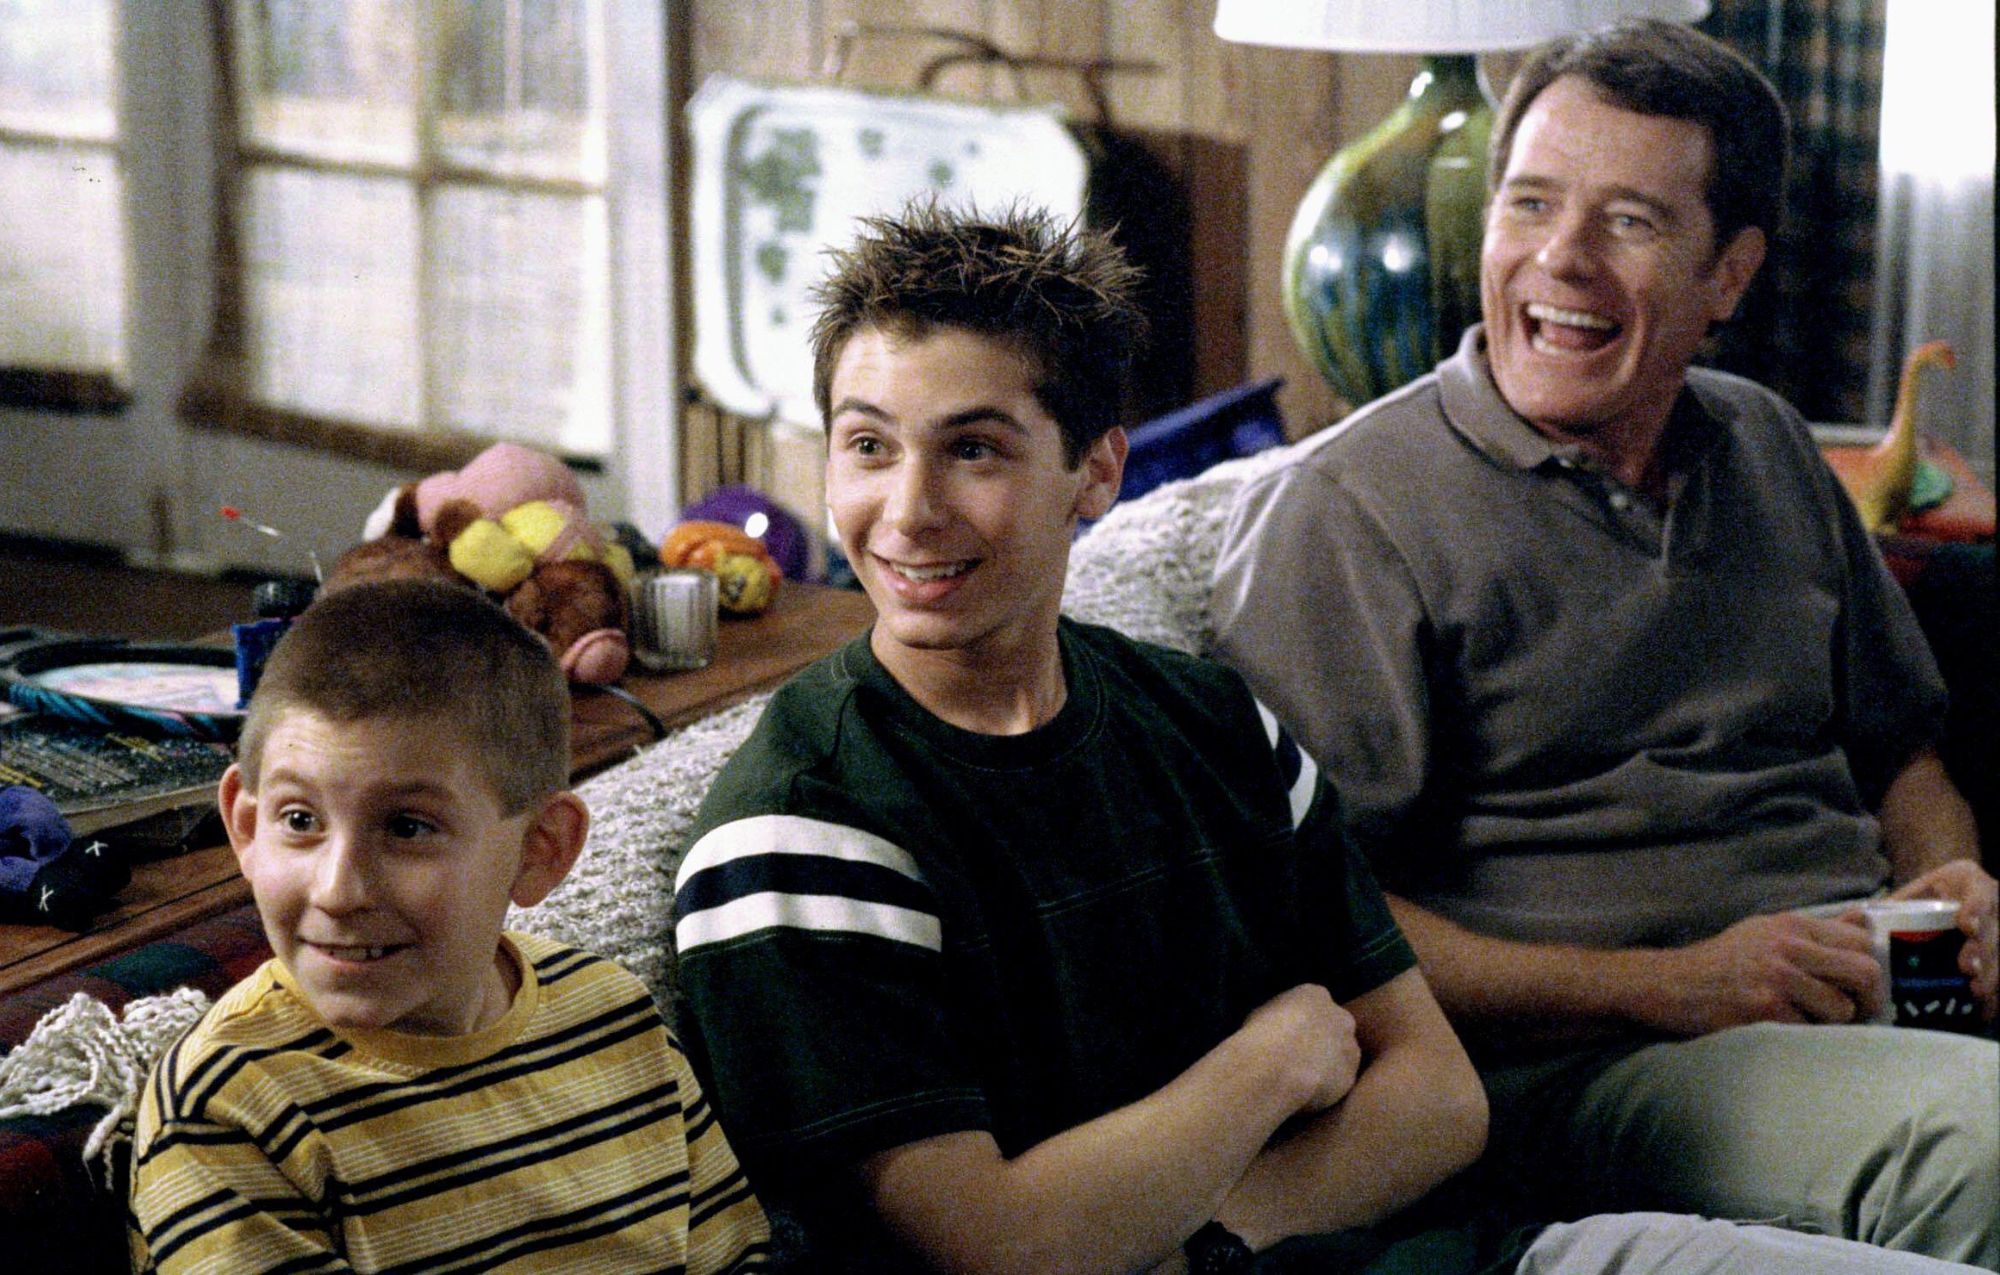 Bryan Cranston says ‘Malcolm In The Middle’ reboot won’t happen “unless there’s a really good idea” behind it